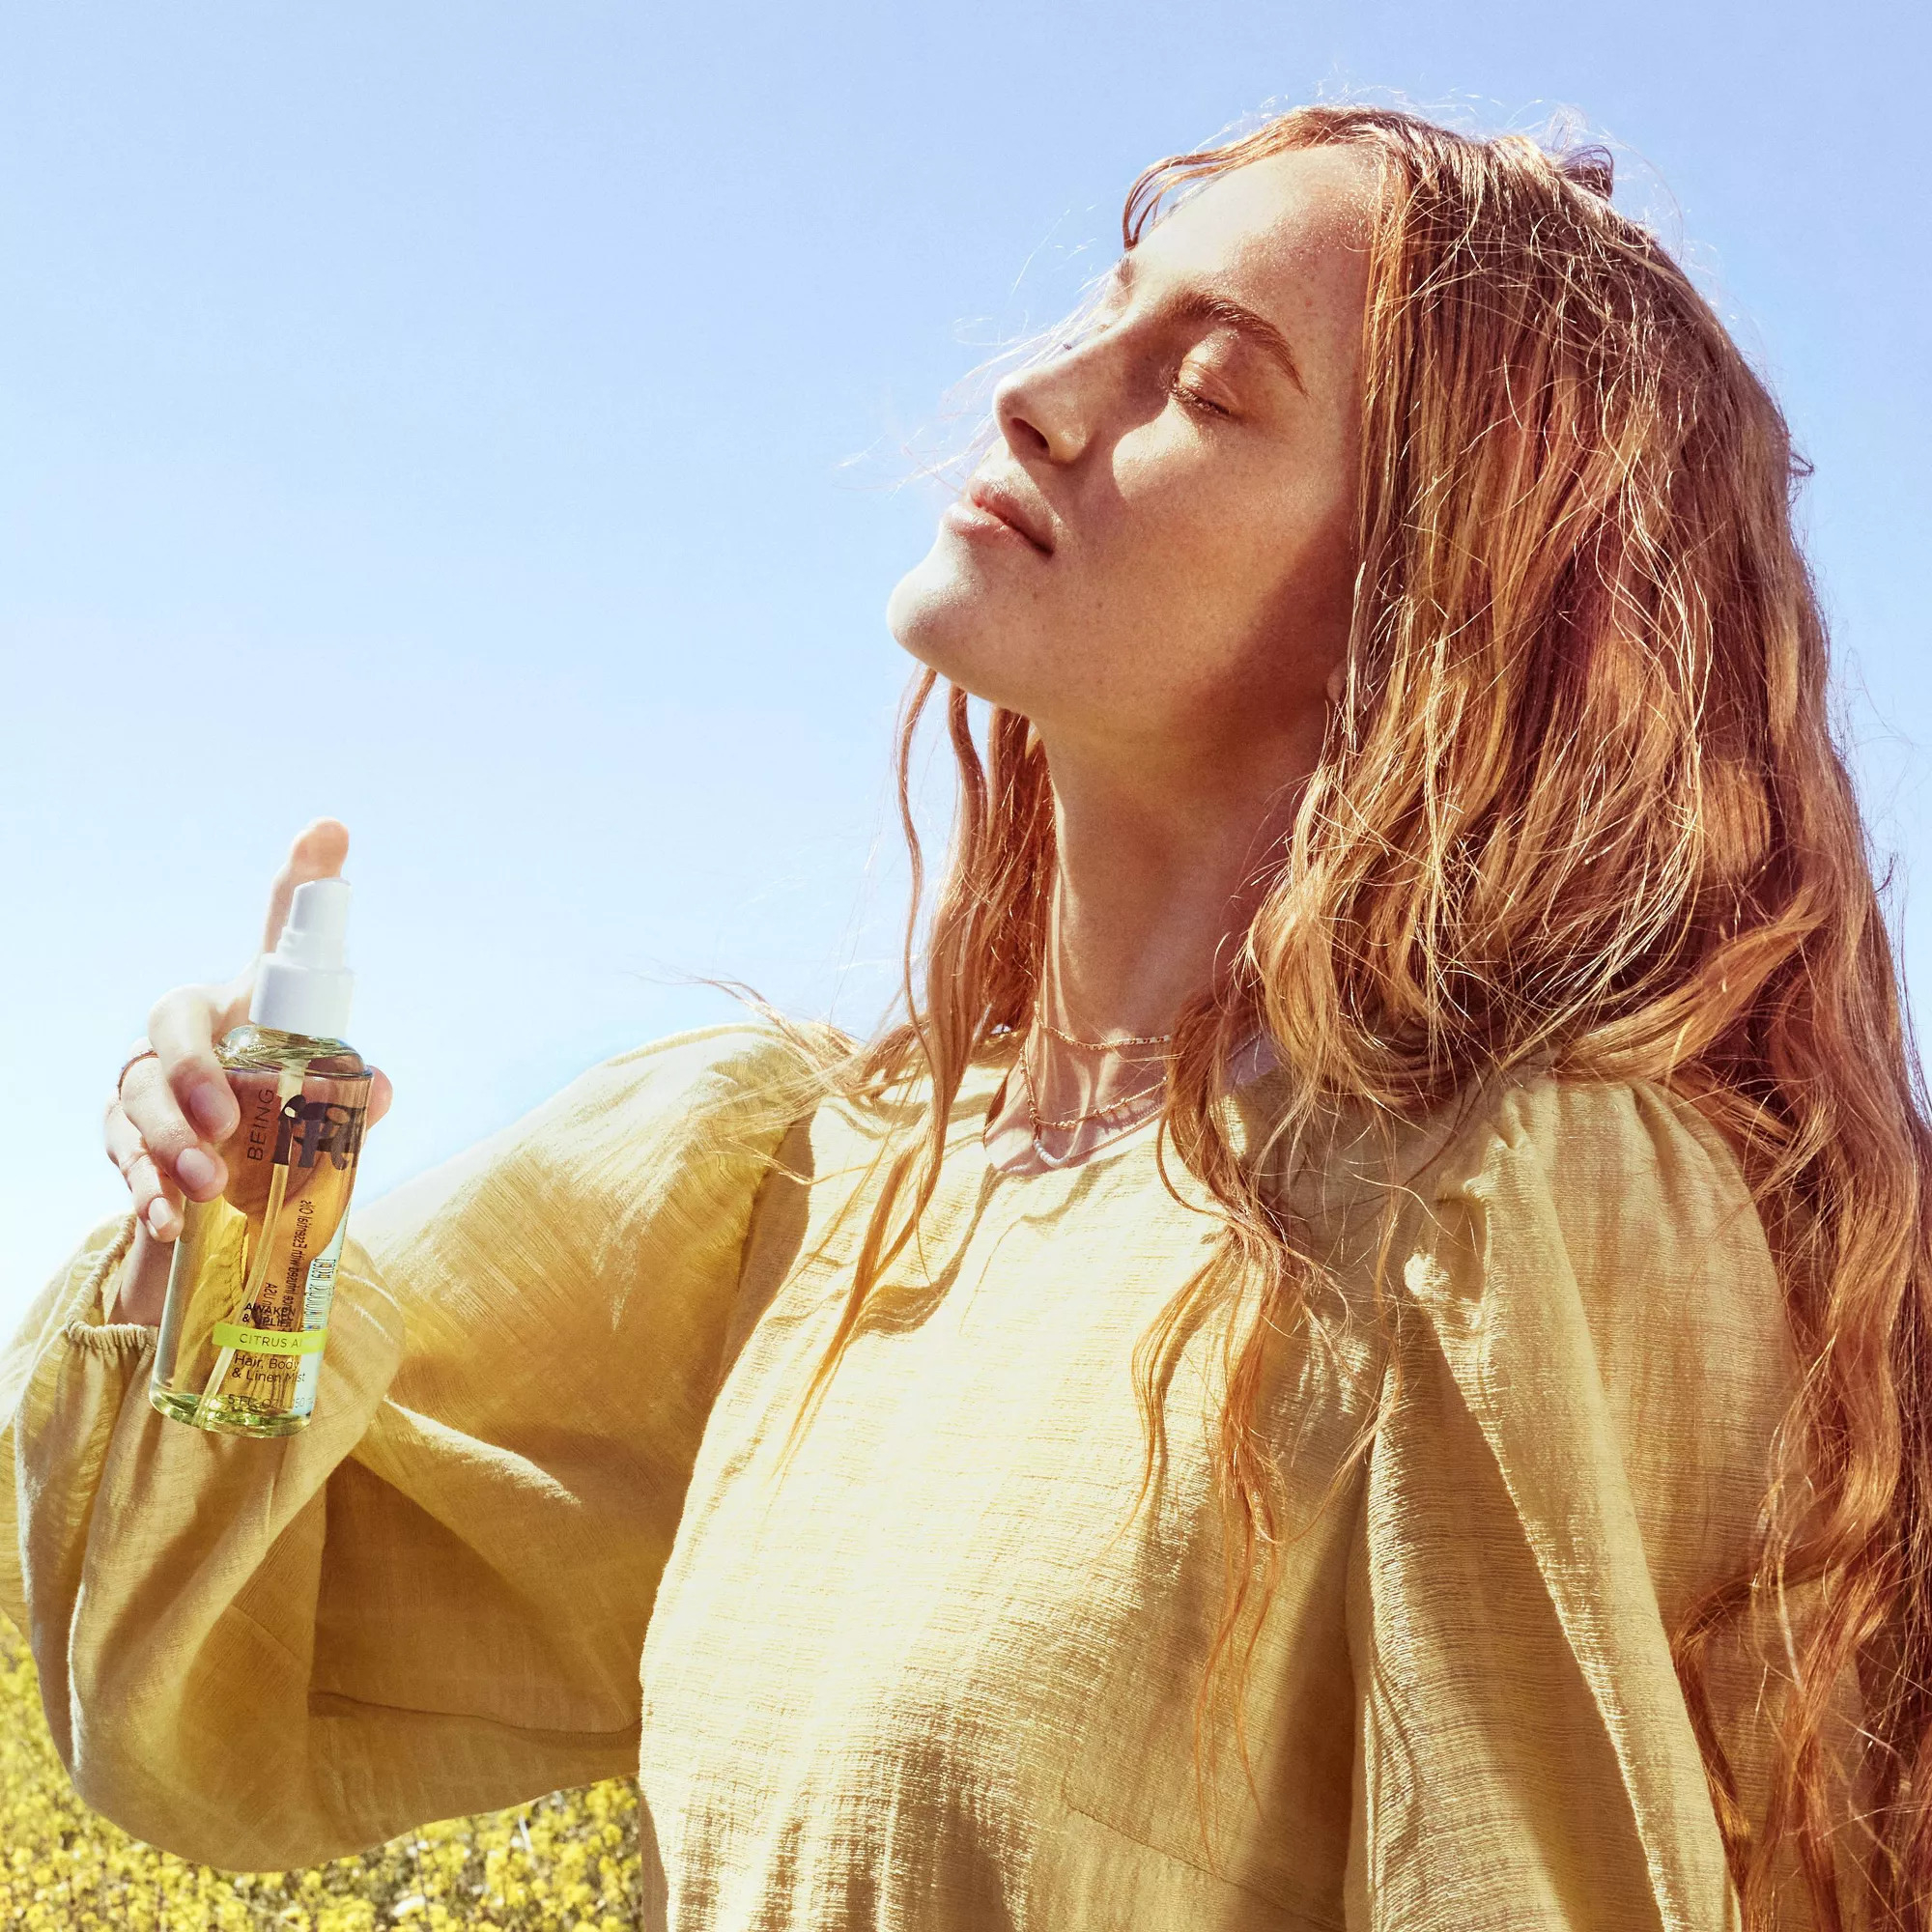 Person holding the spray bottle, eyes closed, in a relaxed pose with a sunny backdrop